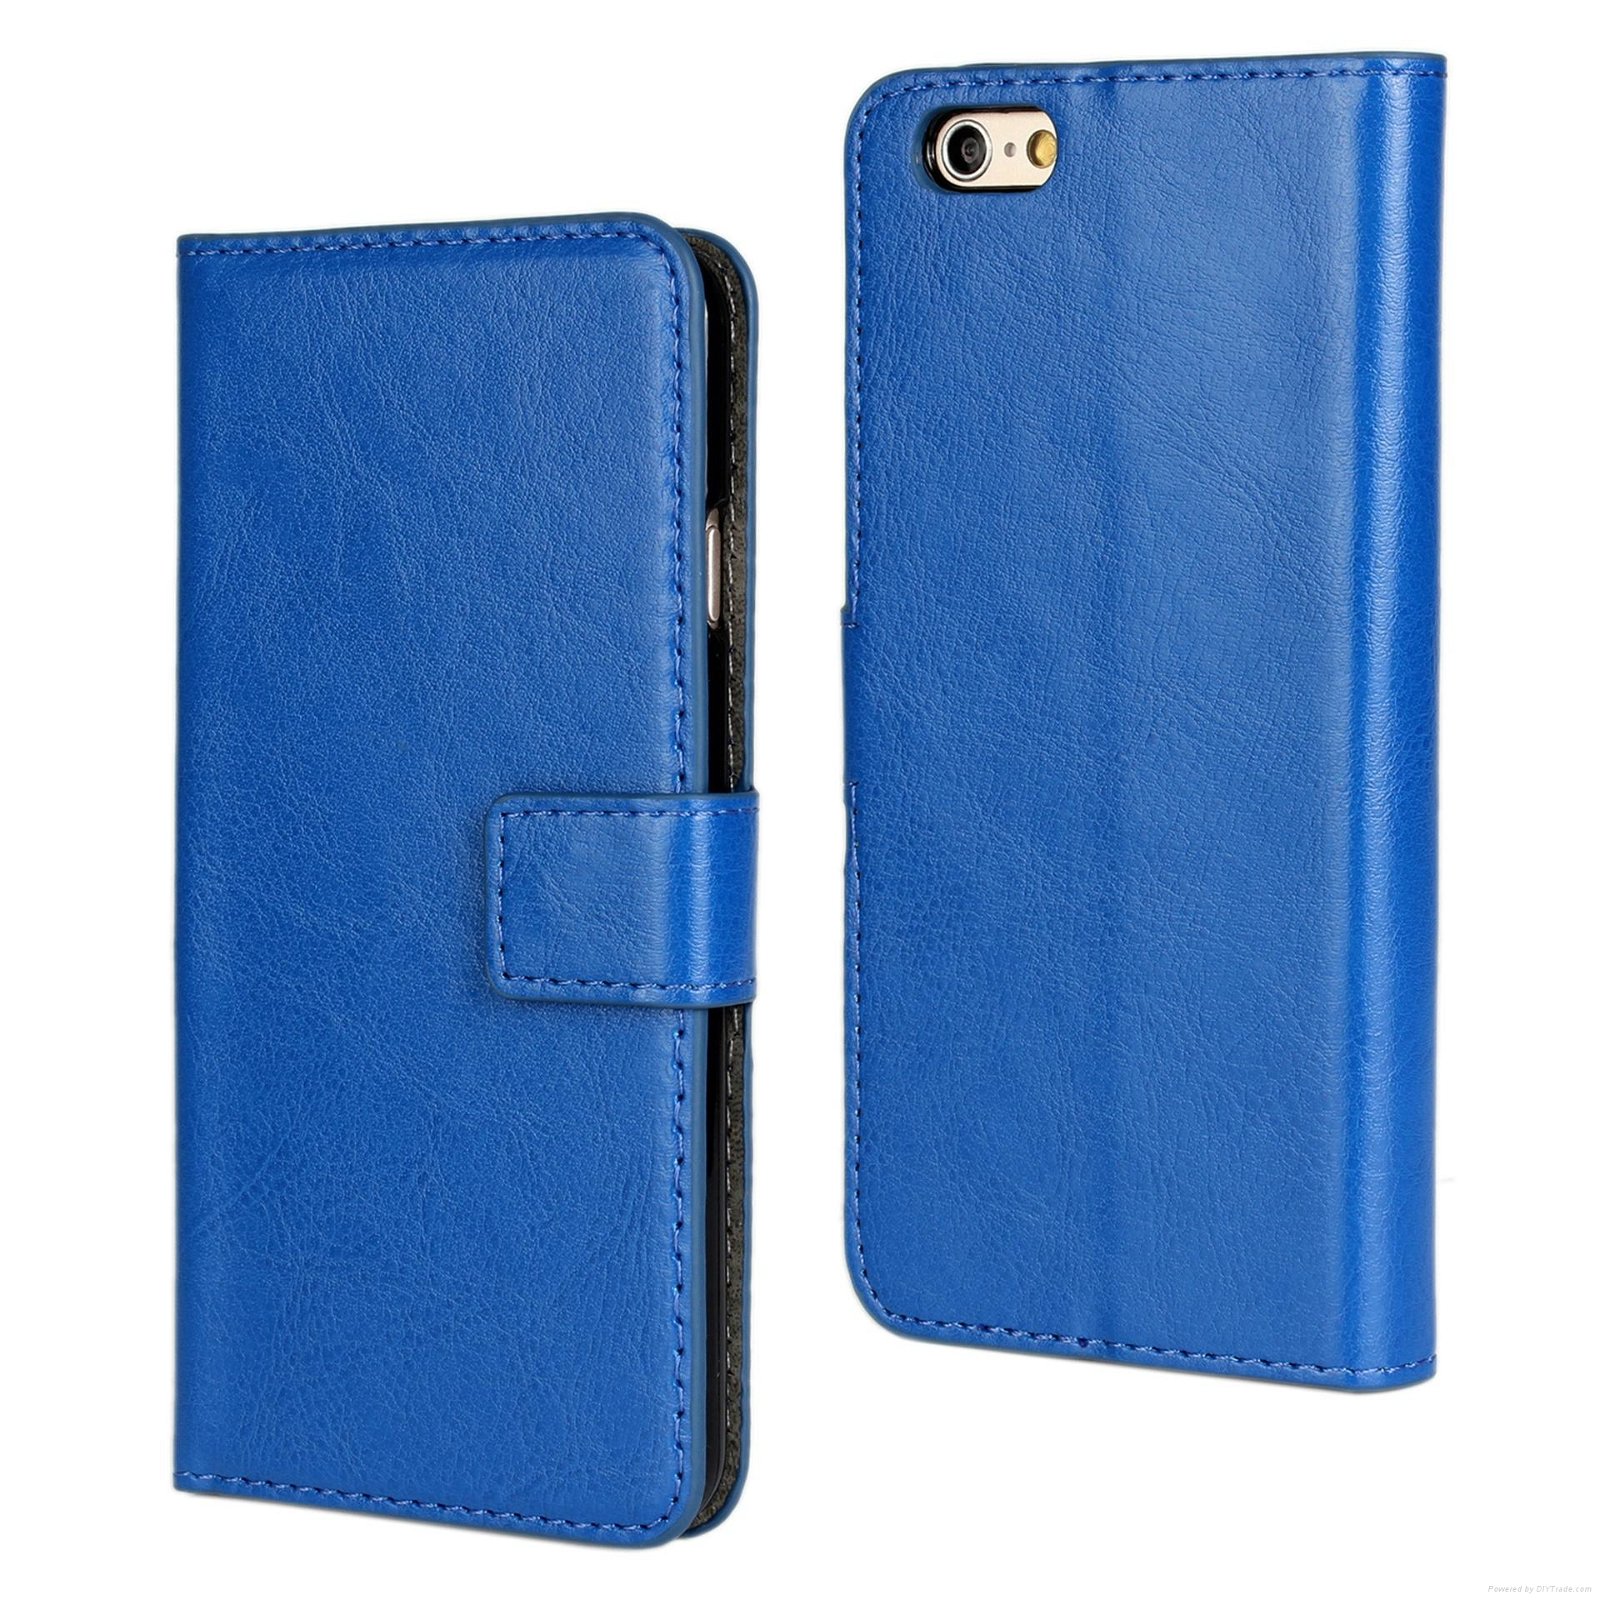 Crazy horse Leather Protector Wallet Case For iPhone for samsung 5